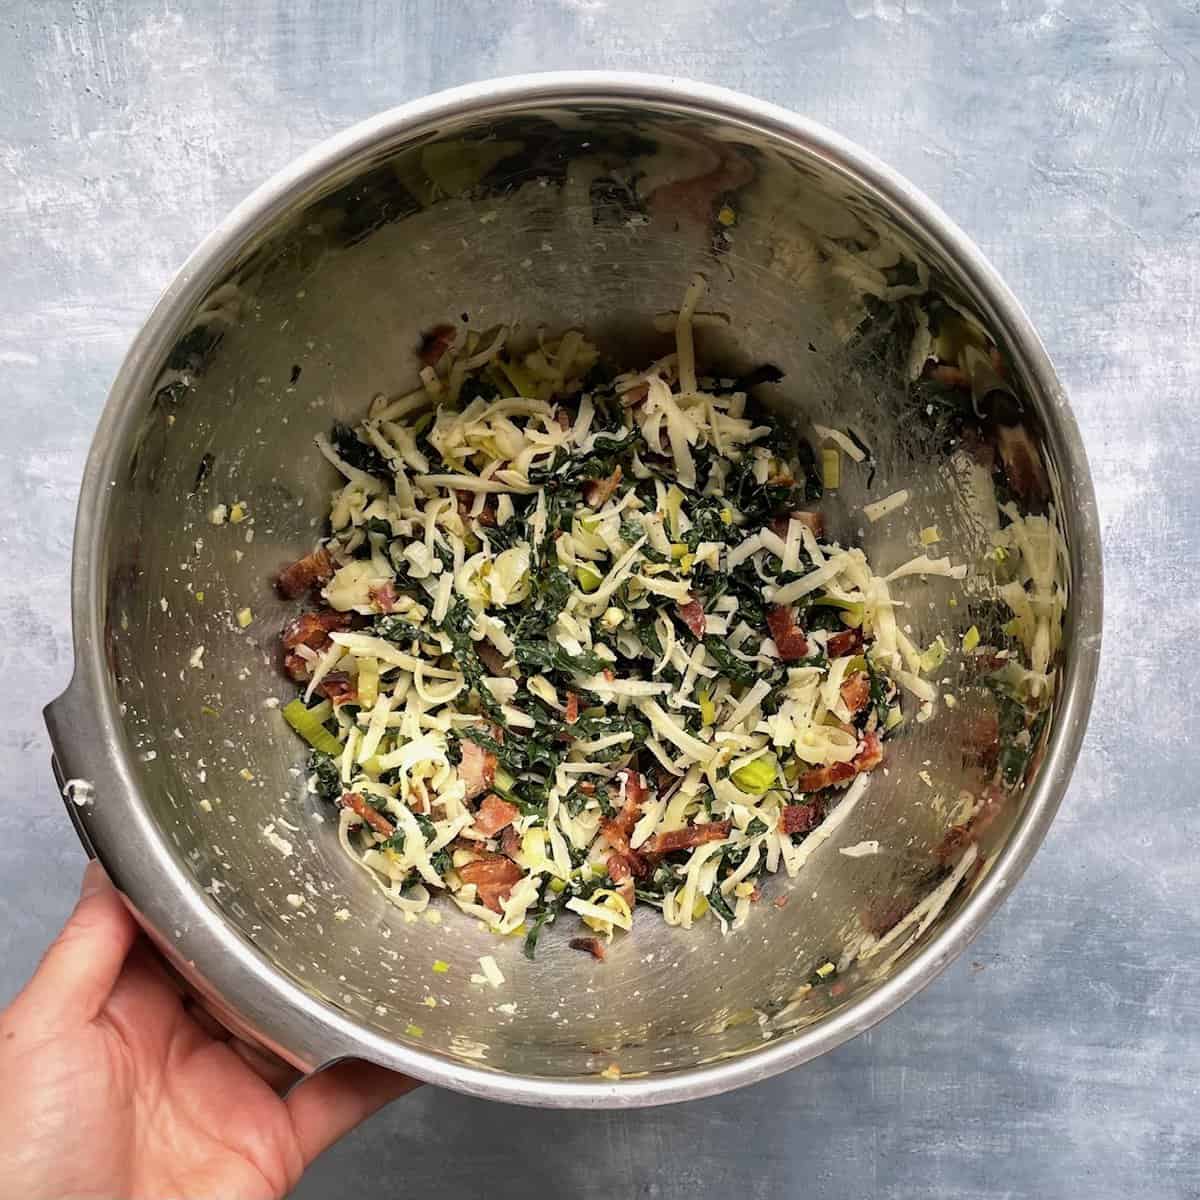 bacon, kale, leek, cheese, and other frittata mix-ins in a metal bowl.